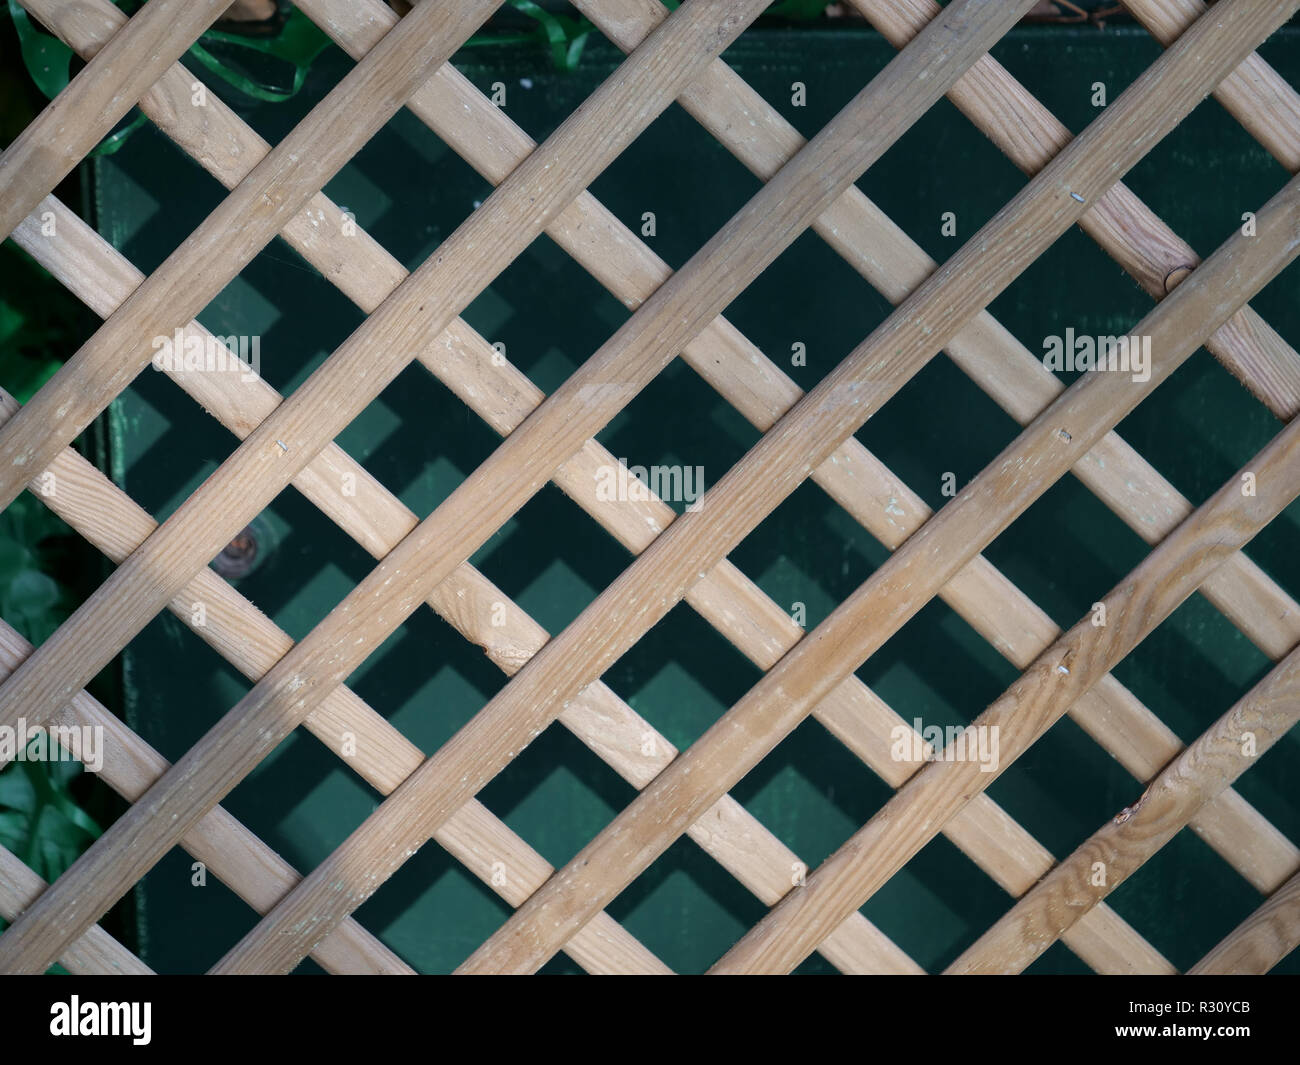 Using a garden trellis for screening, for supporting plants, for an attractive feature and focal point to enhance the outdoor space, London, UK. Stock Photo